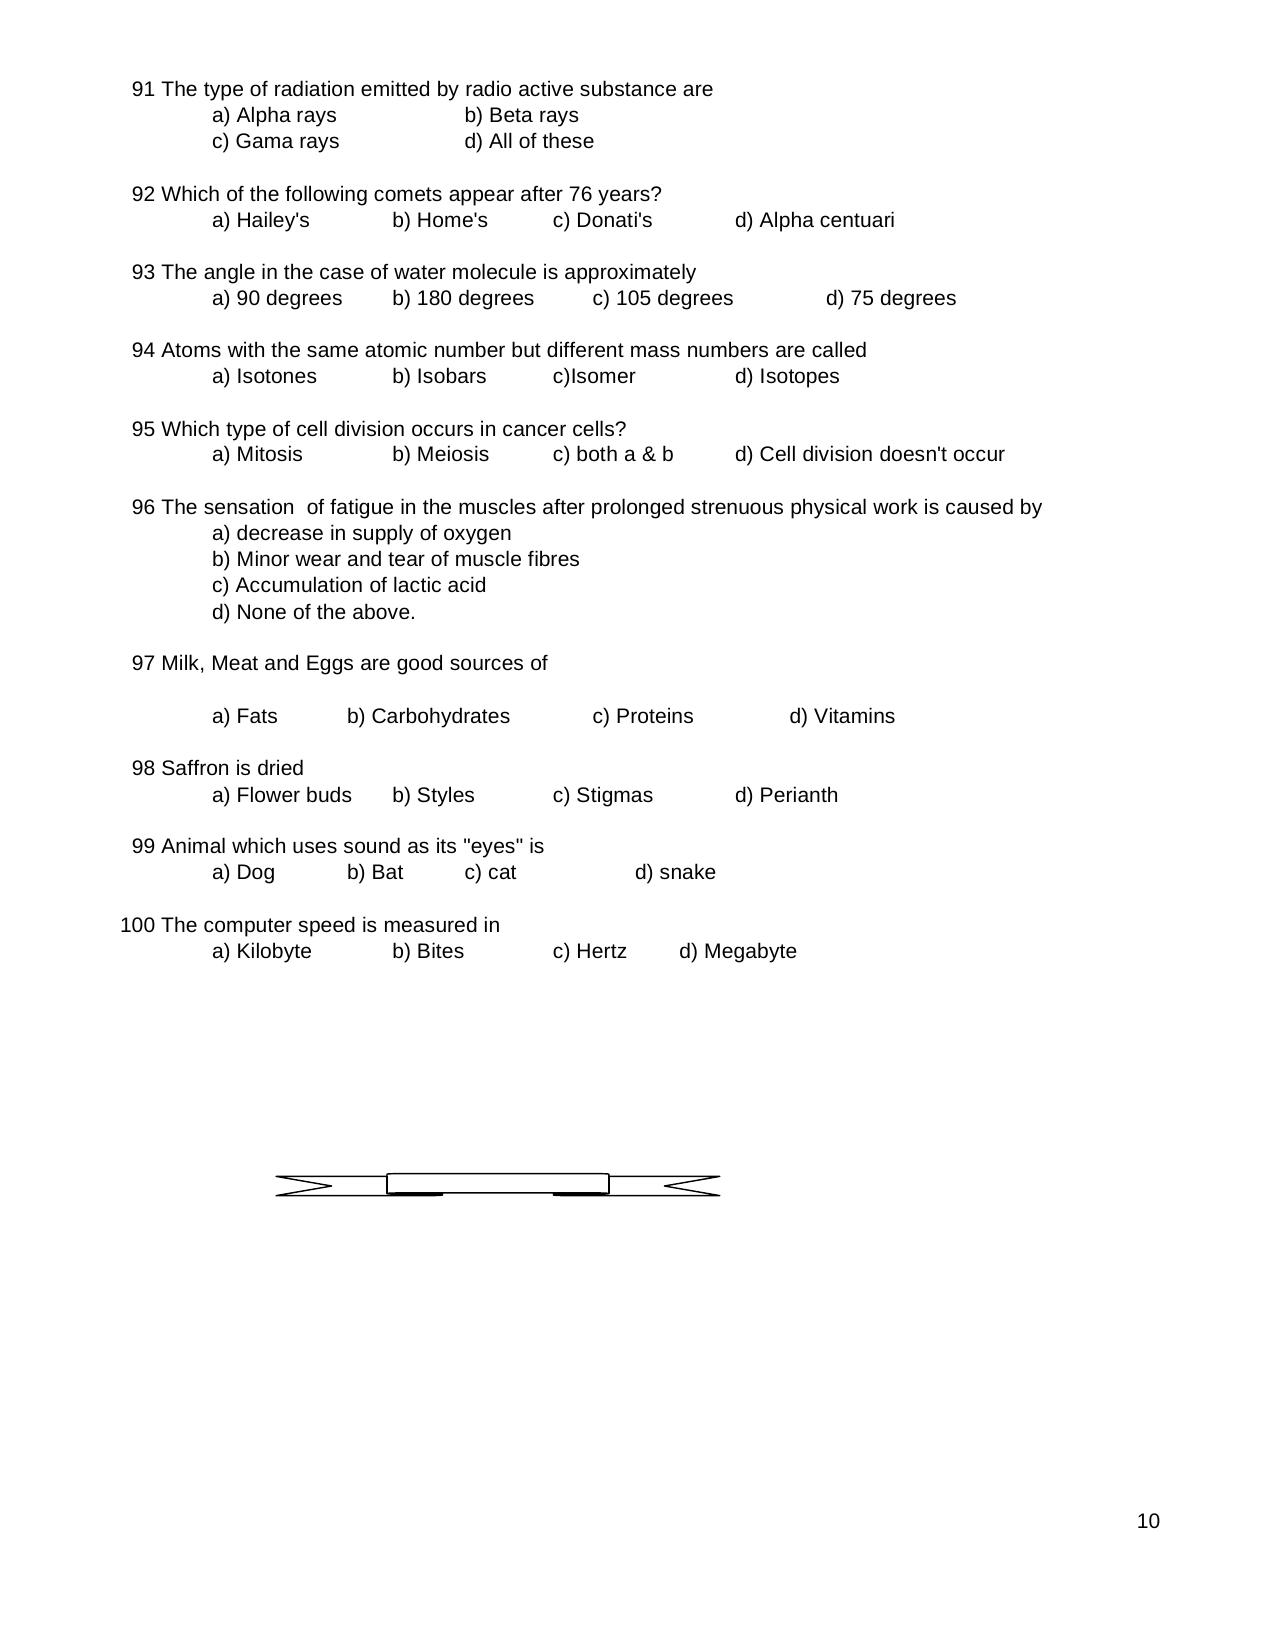 TNPSC Assistant System Engineer Sample Papers Numerical Ability - Page 10